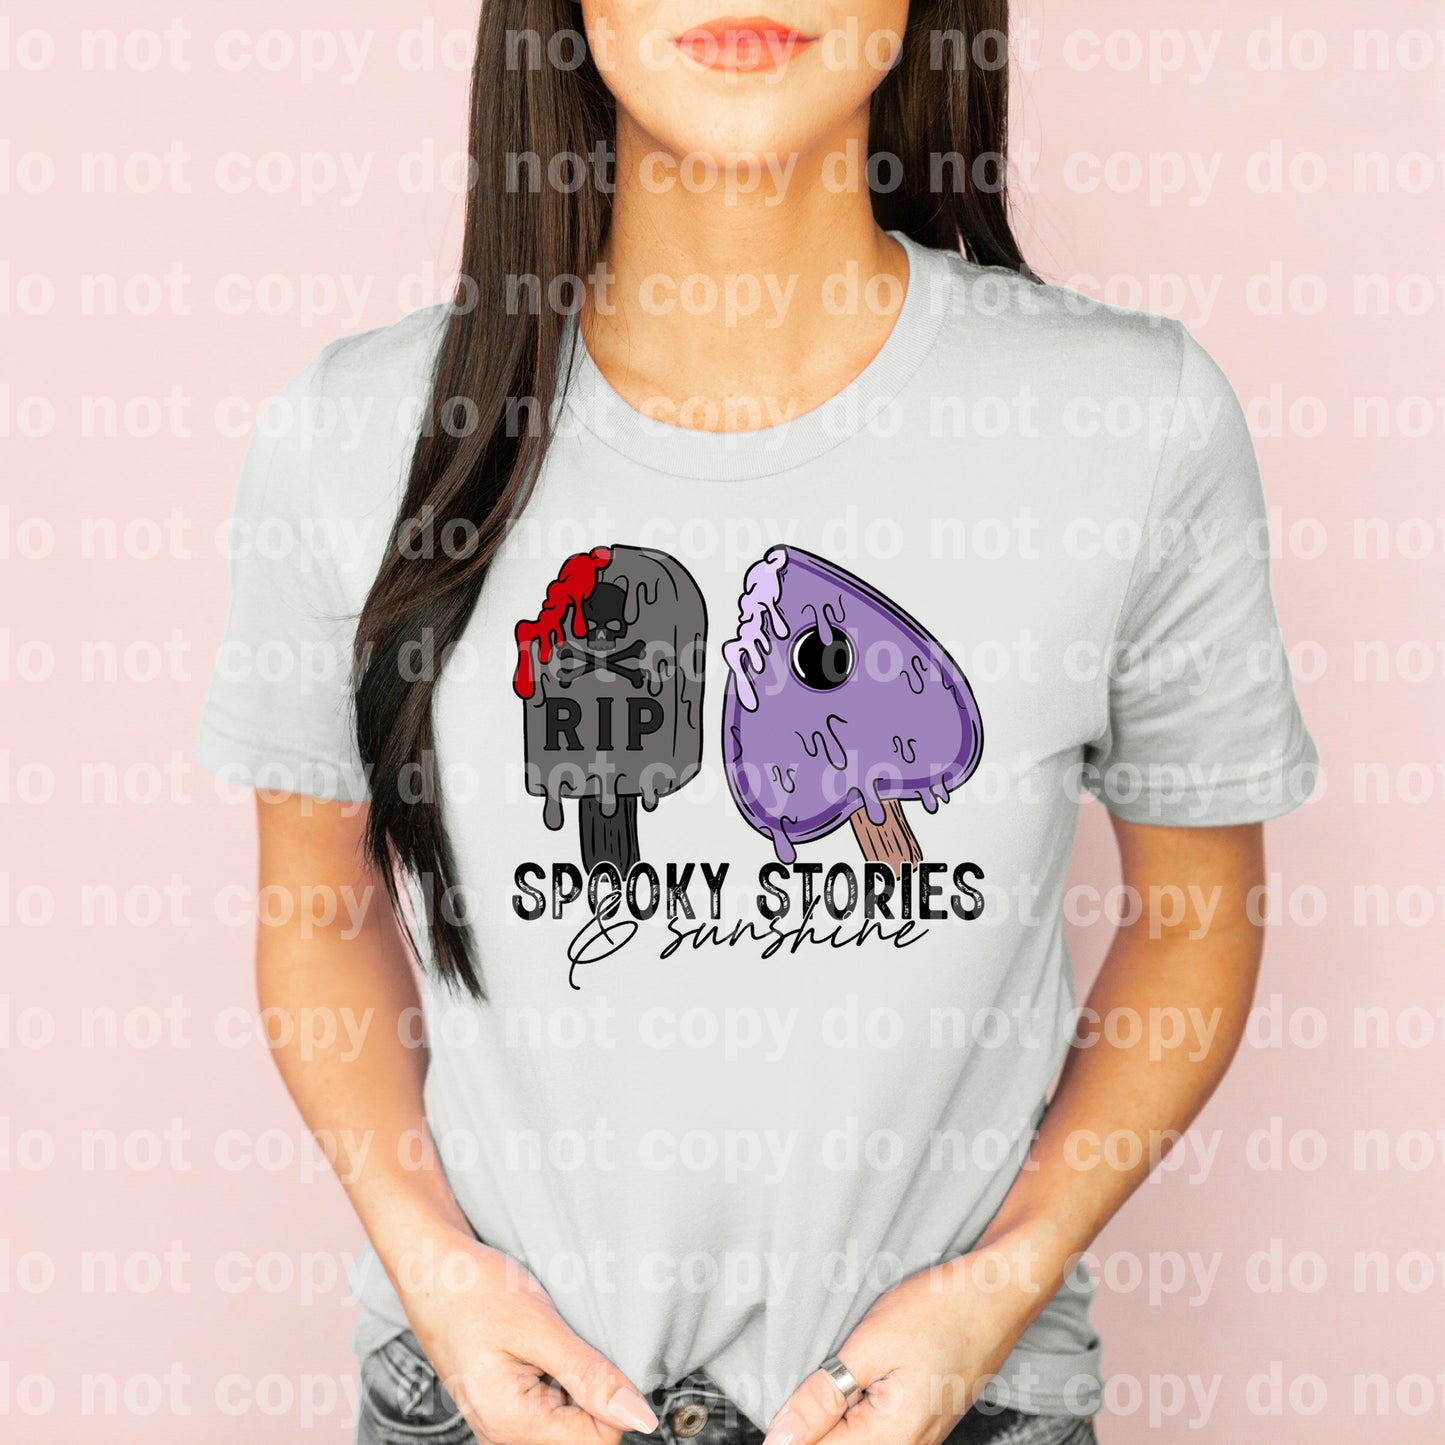 Spooky Stories And Sunshine Black/White Dream Print or Sublimation Print